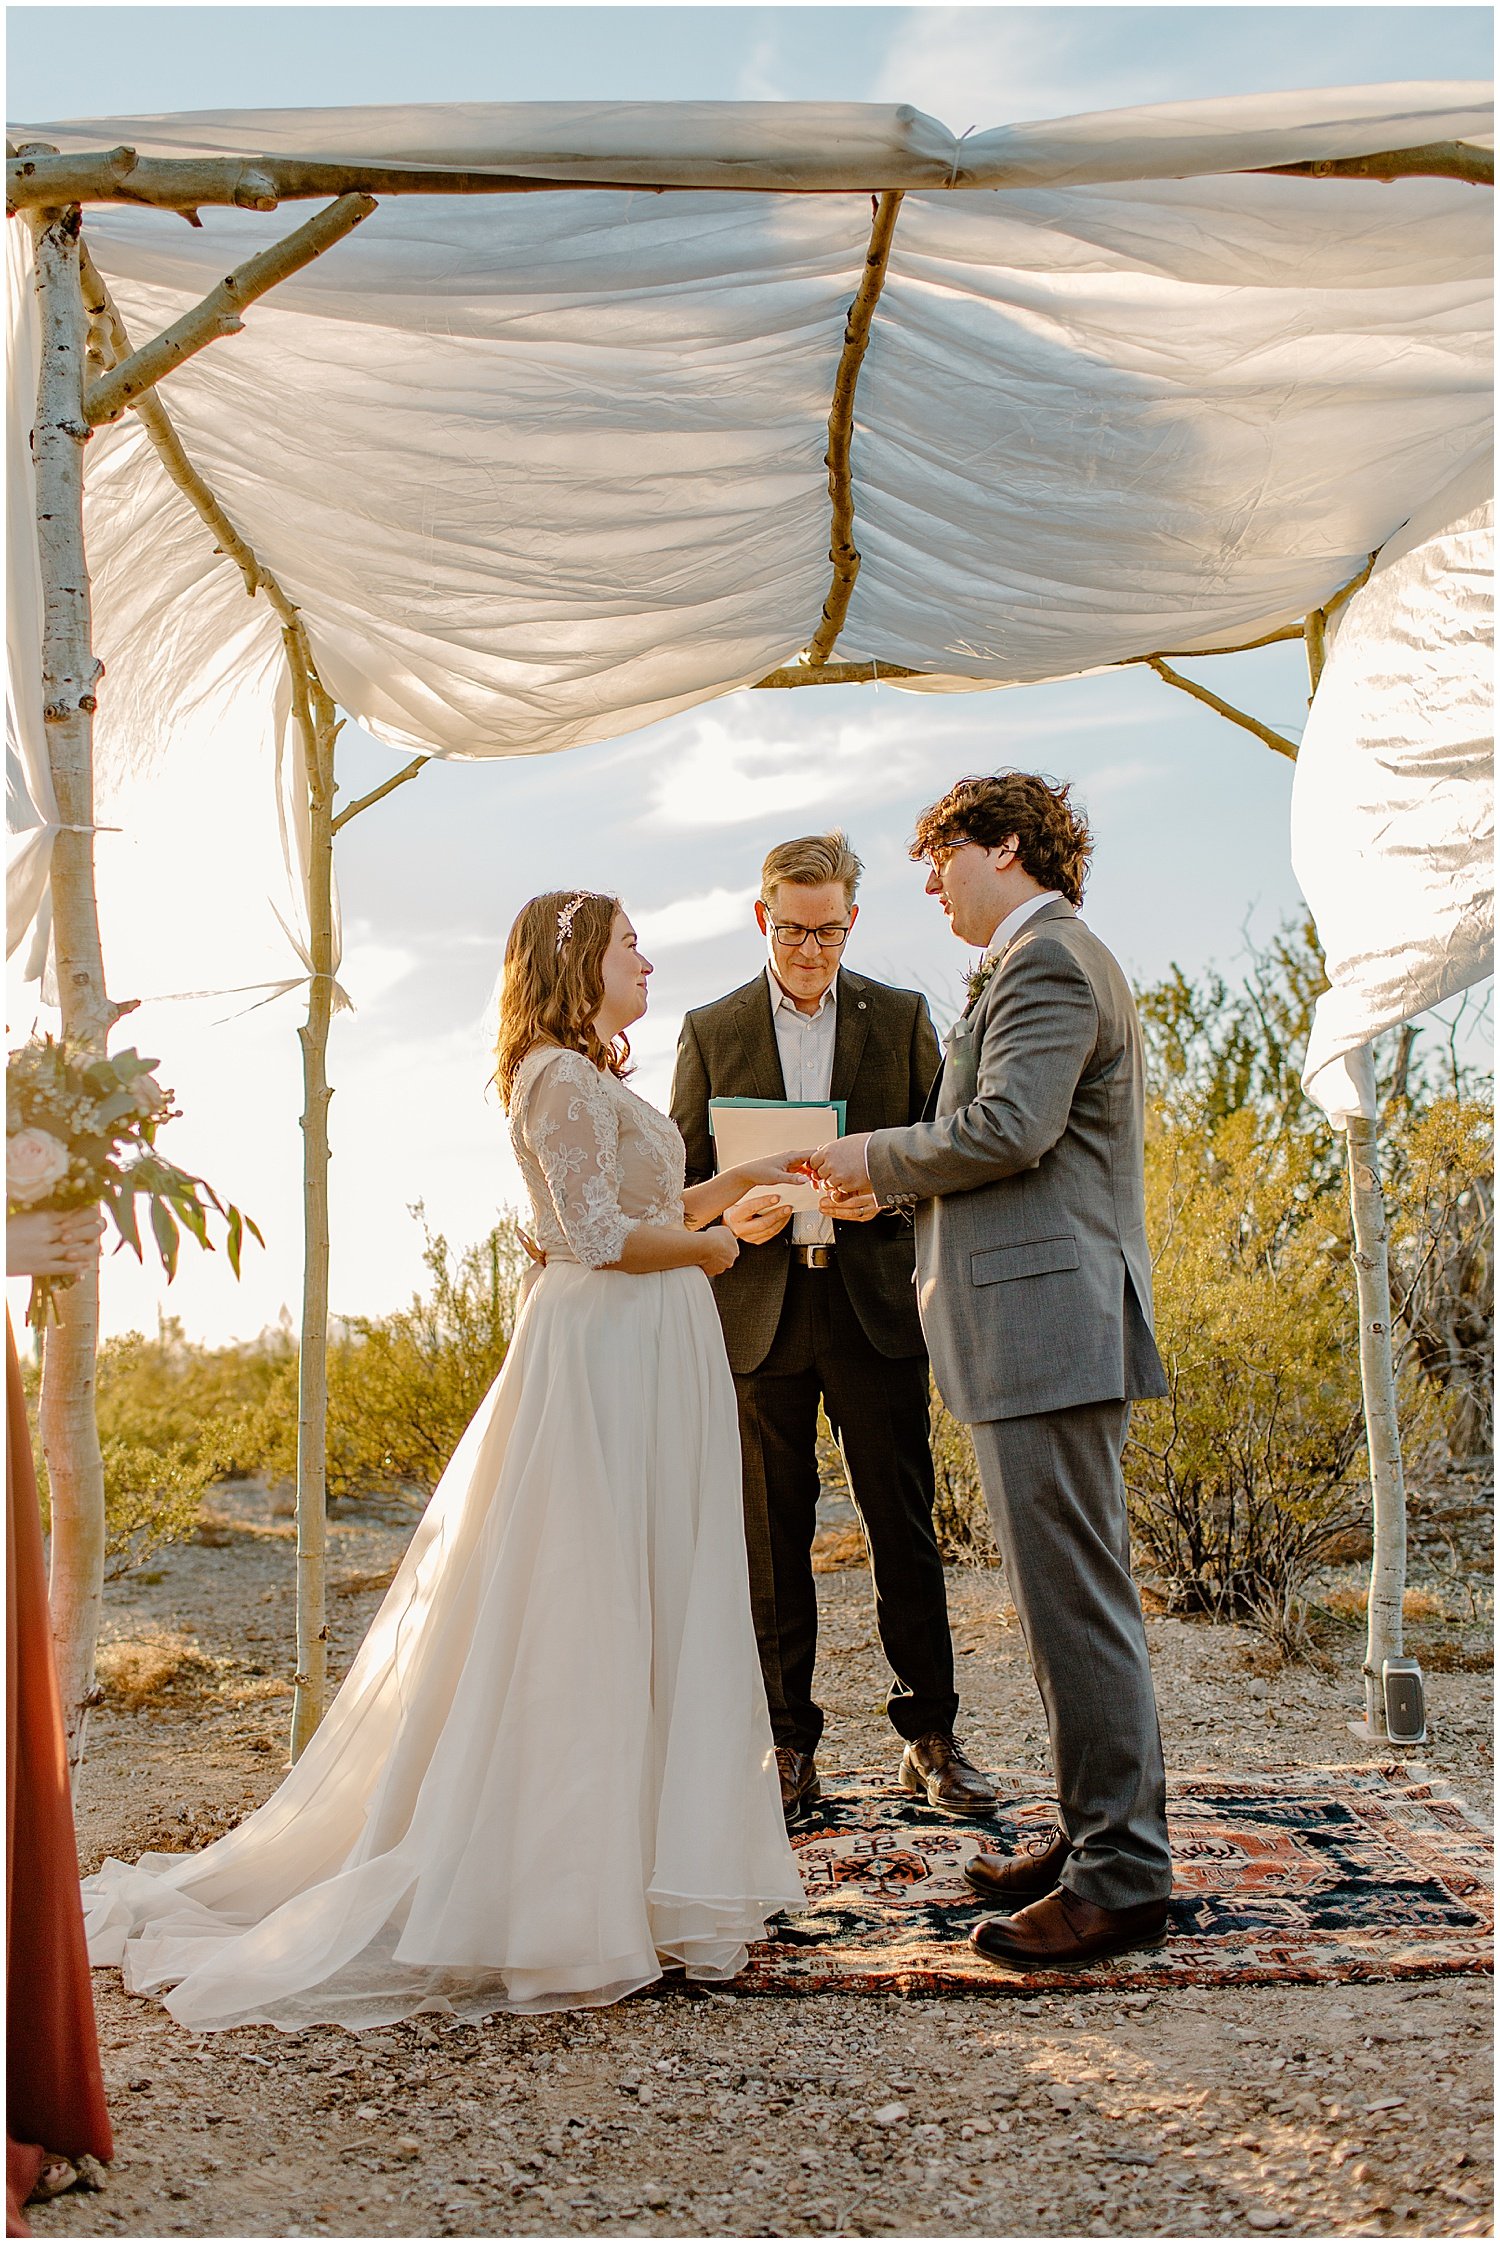  bride and groom facing one another at Tucson Intimate Wedding ceremony  